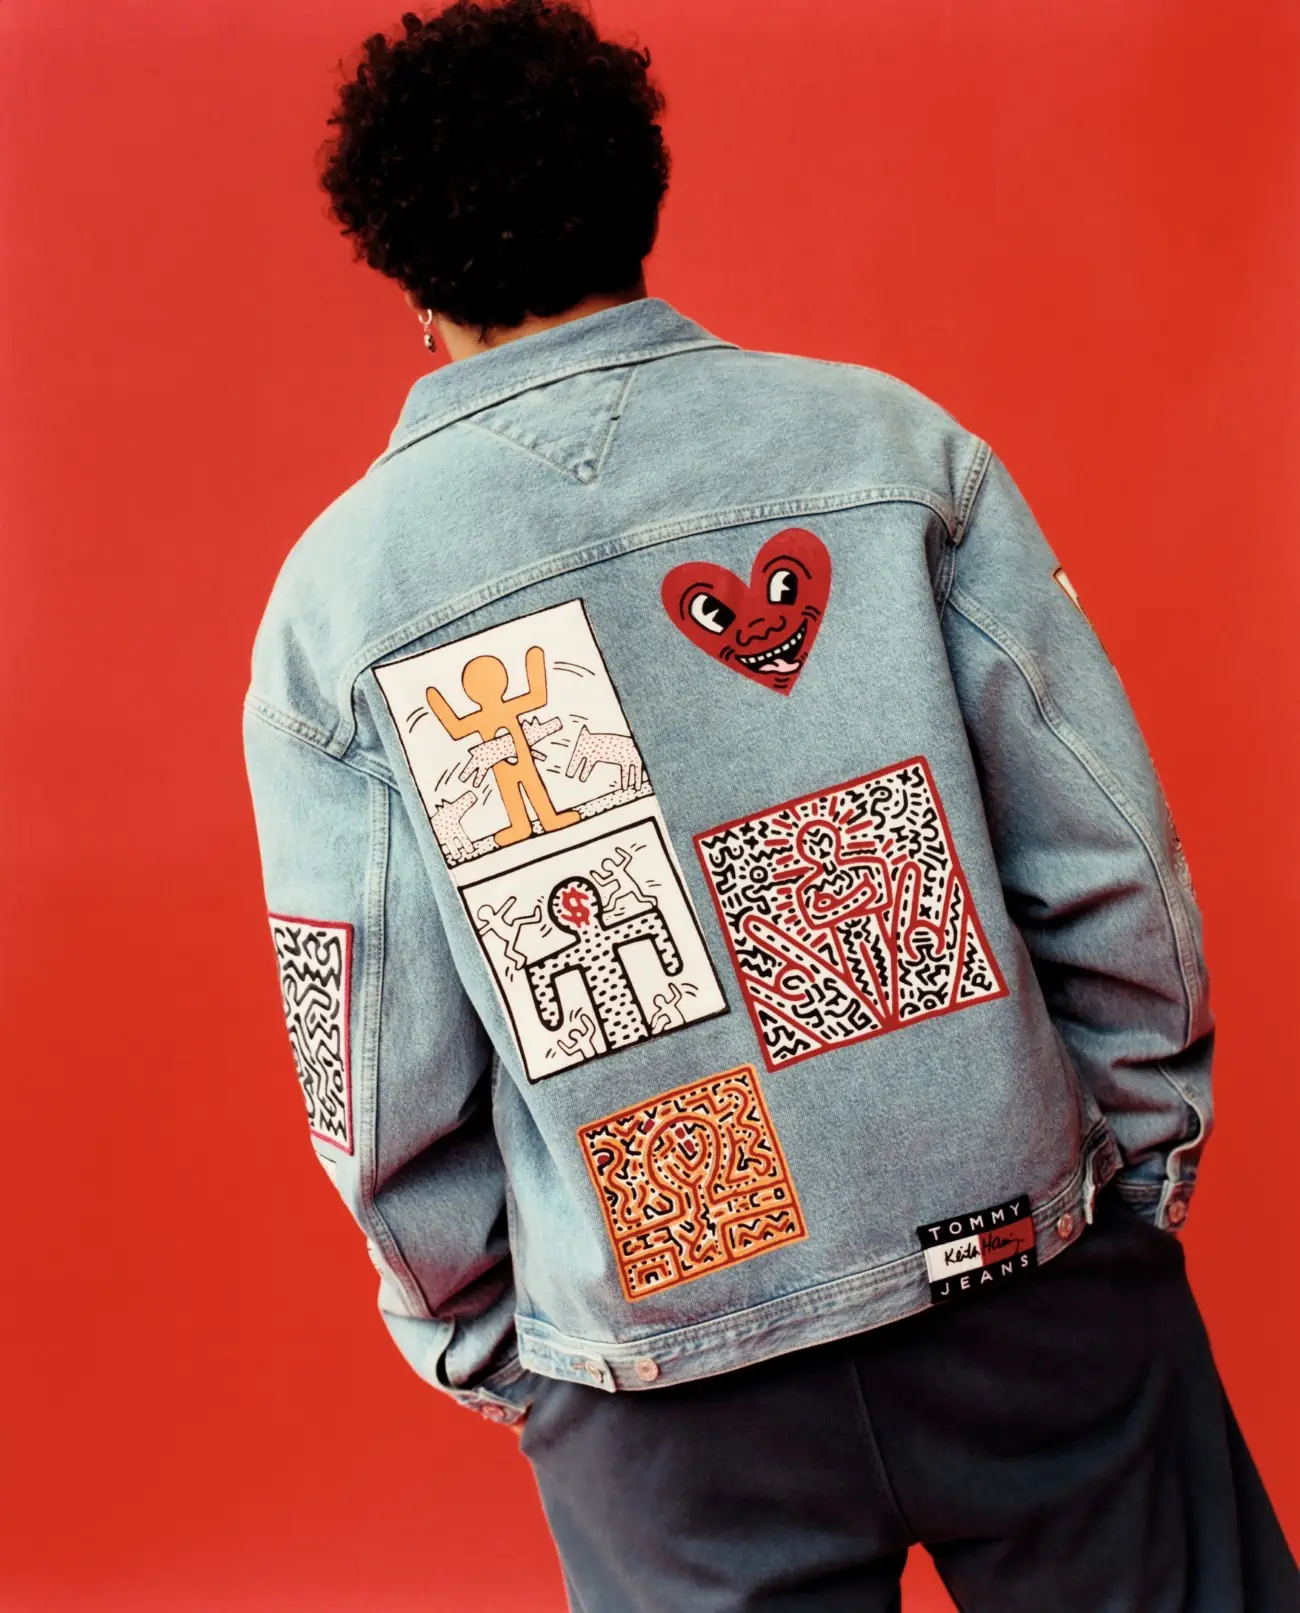 Tommy Jeans x Keith Haring, a fashion ode to New York City